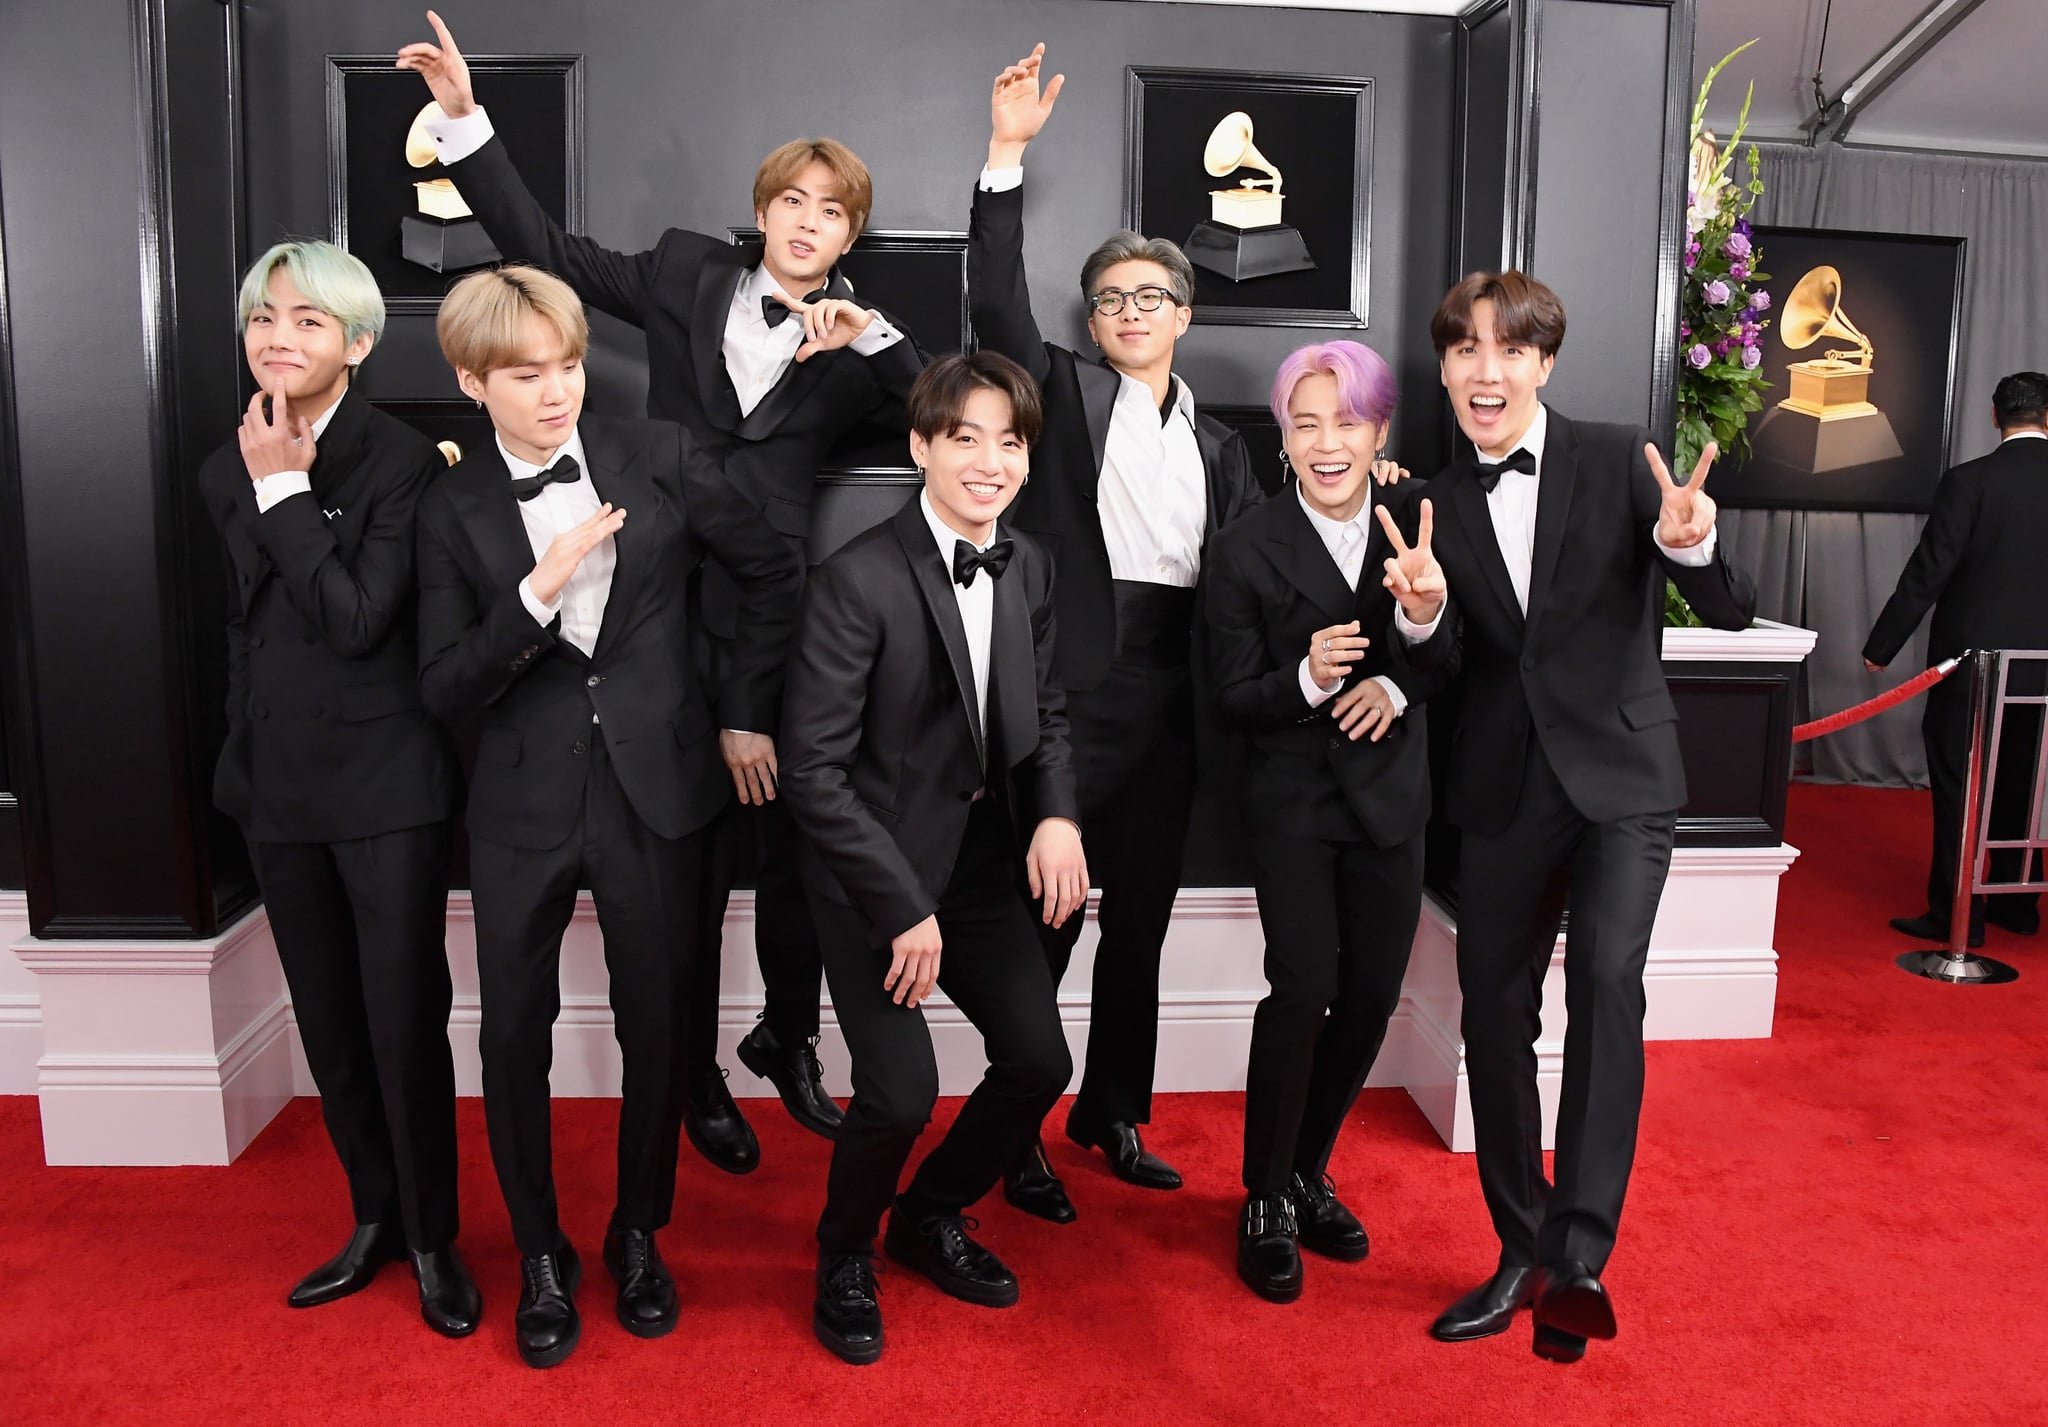 LOS ANGELES, CA - FEBRUARY 10:  South Korean boy band BTS attends the 61st Annual GRAMMY Awards at Staples Centre on February 10, 2019 in Los Angeles, California.  (Photo by Steve Granitz/WireImage)